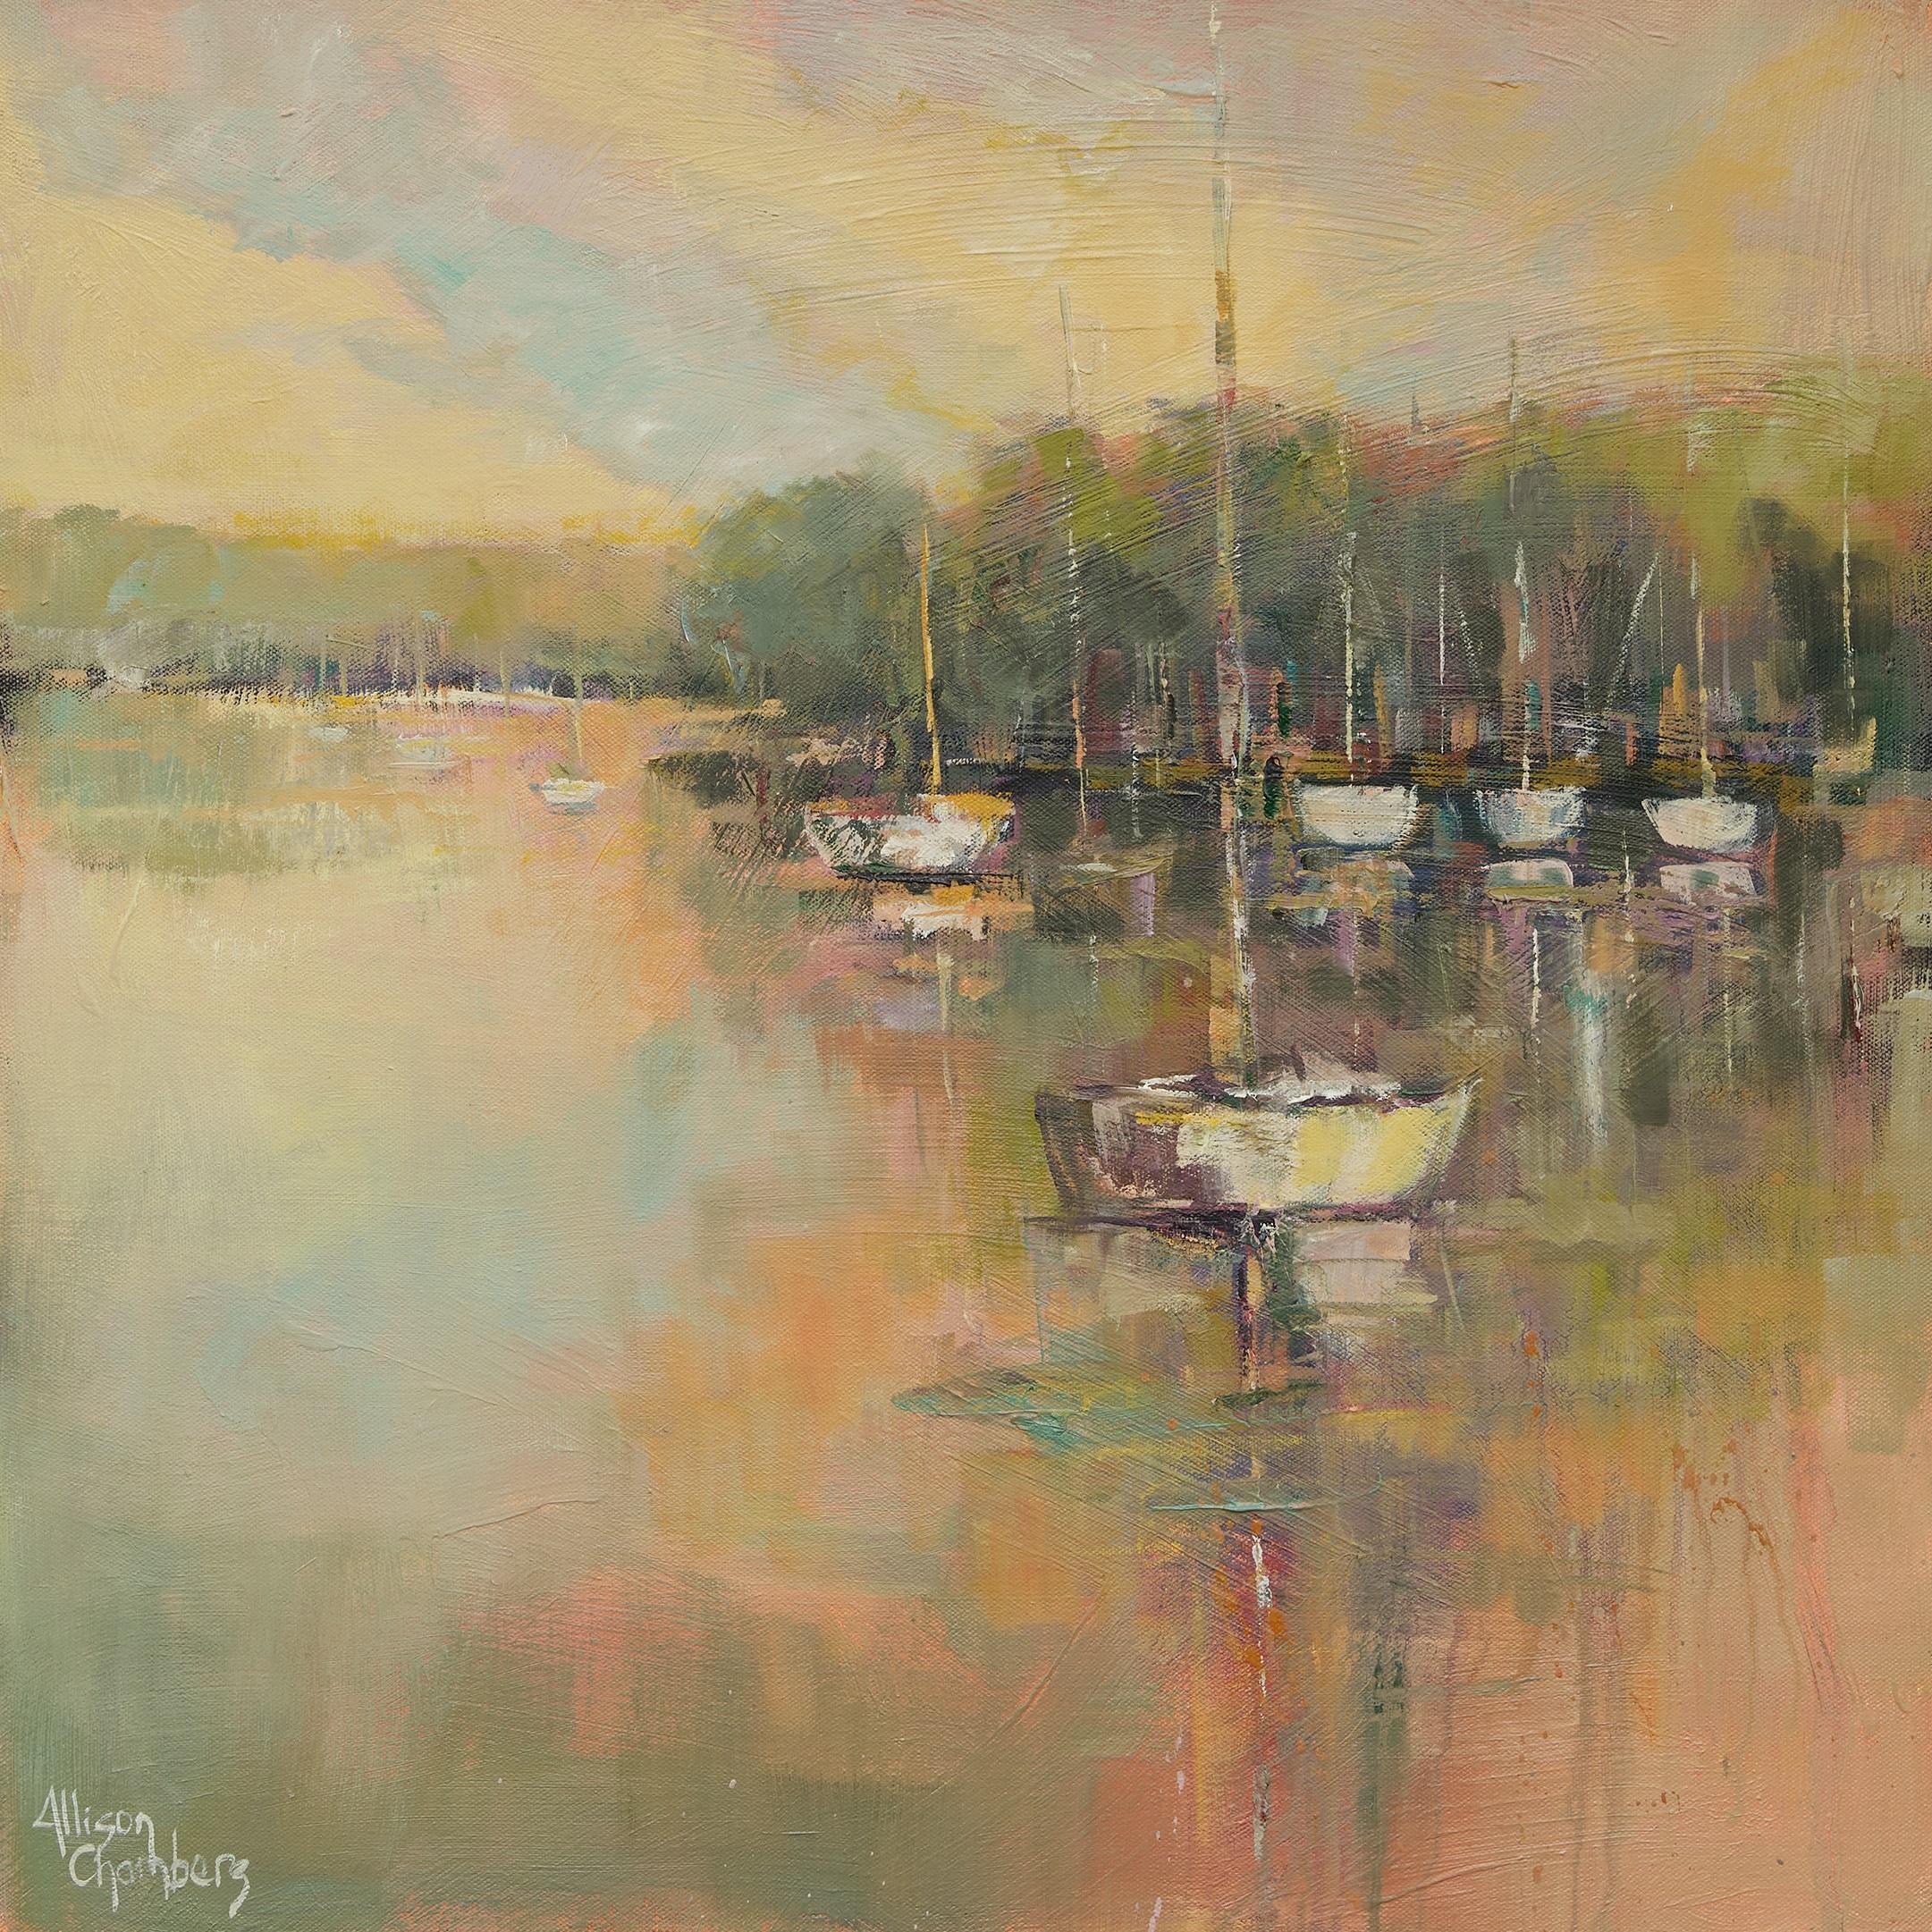 'Peaceful Harbor' is a framed Impressionist oil on panel painting of square format created by American artist Allison Chambers in 2020. Featuring a palette made of green, purple, brown and soft pink tones among many others, this painting depicts a